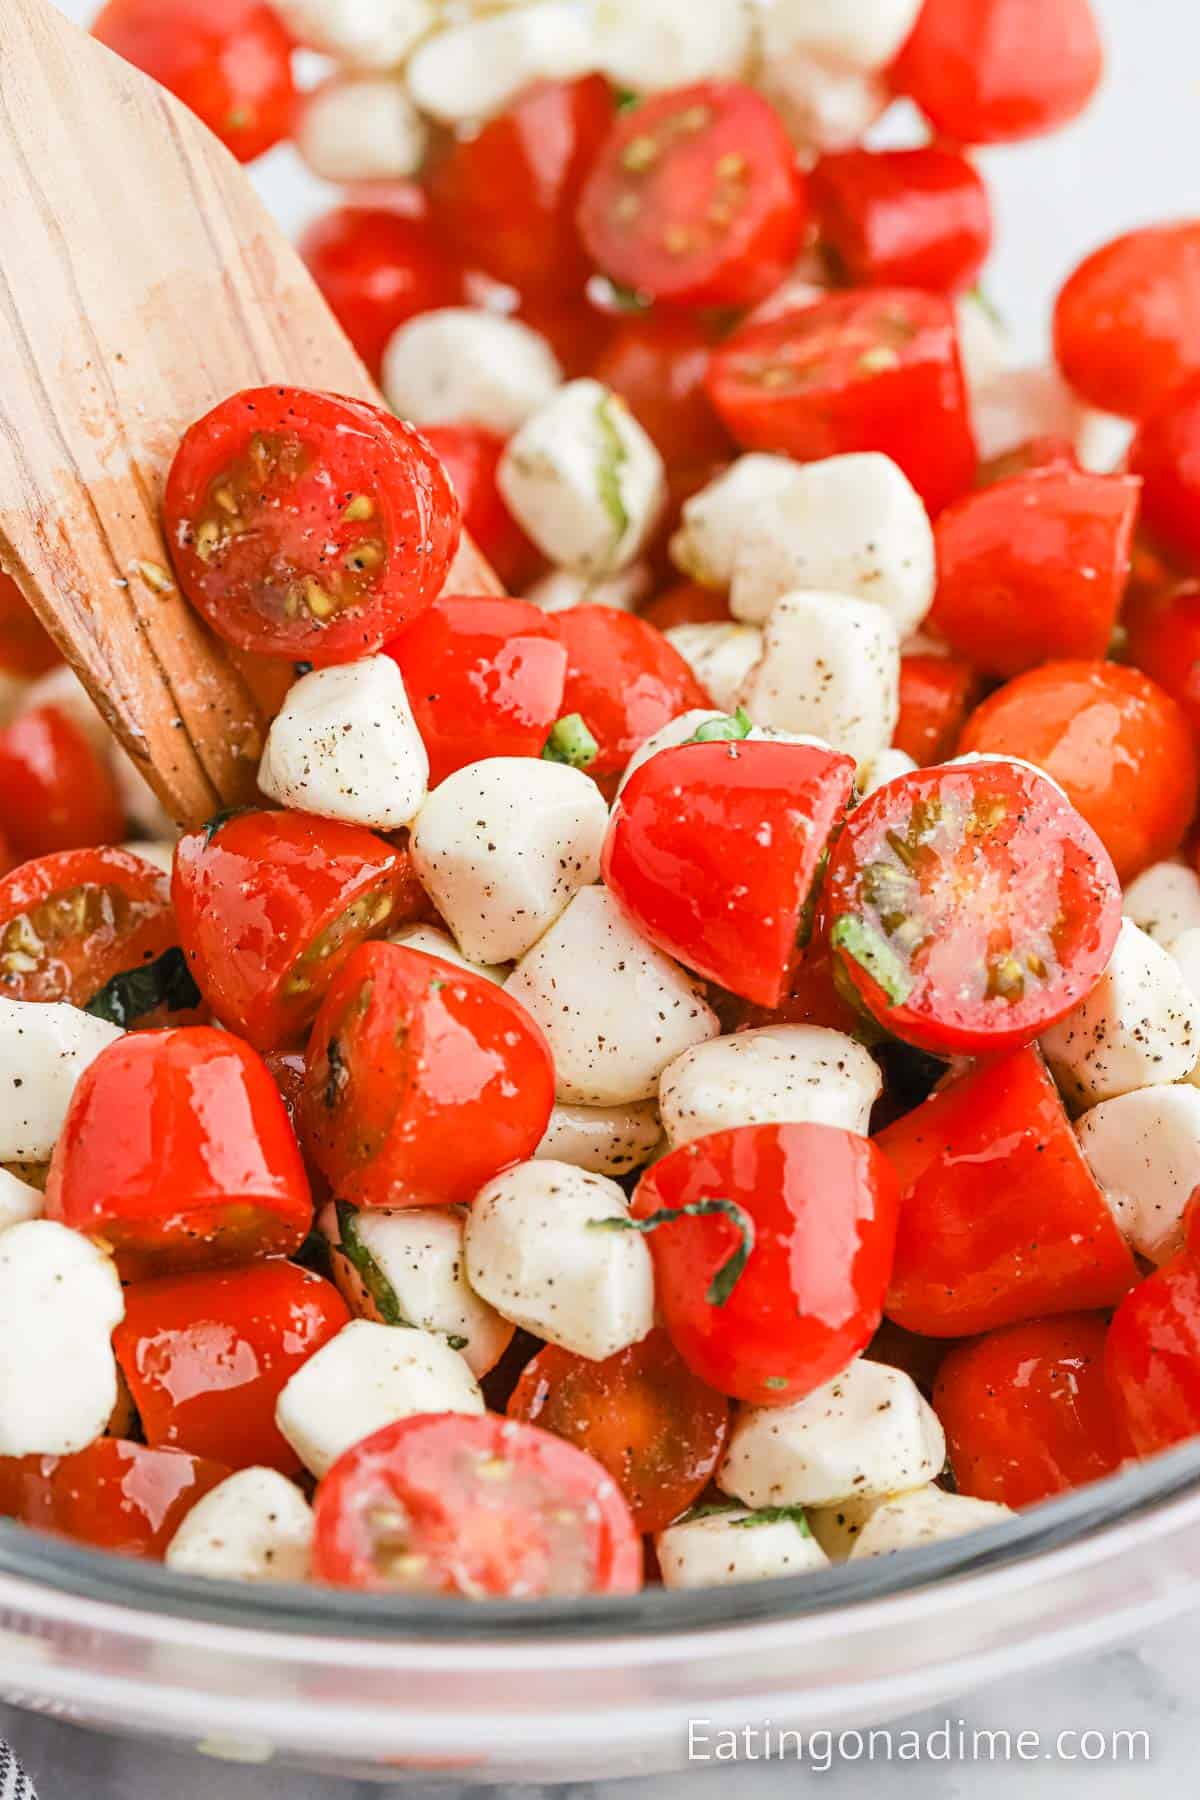 Close up image of slice cherry tomatoes and mozzarella cubes